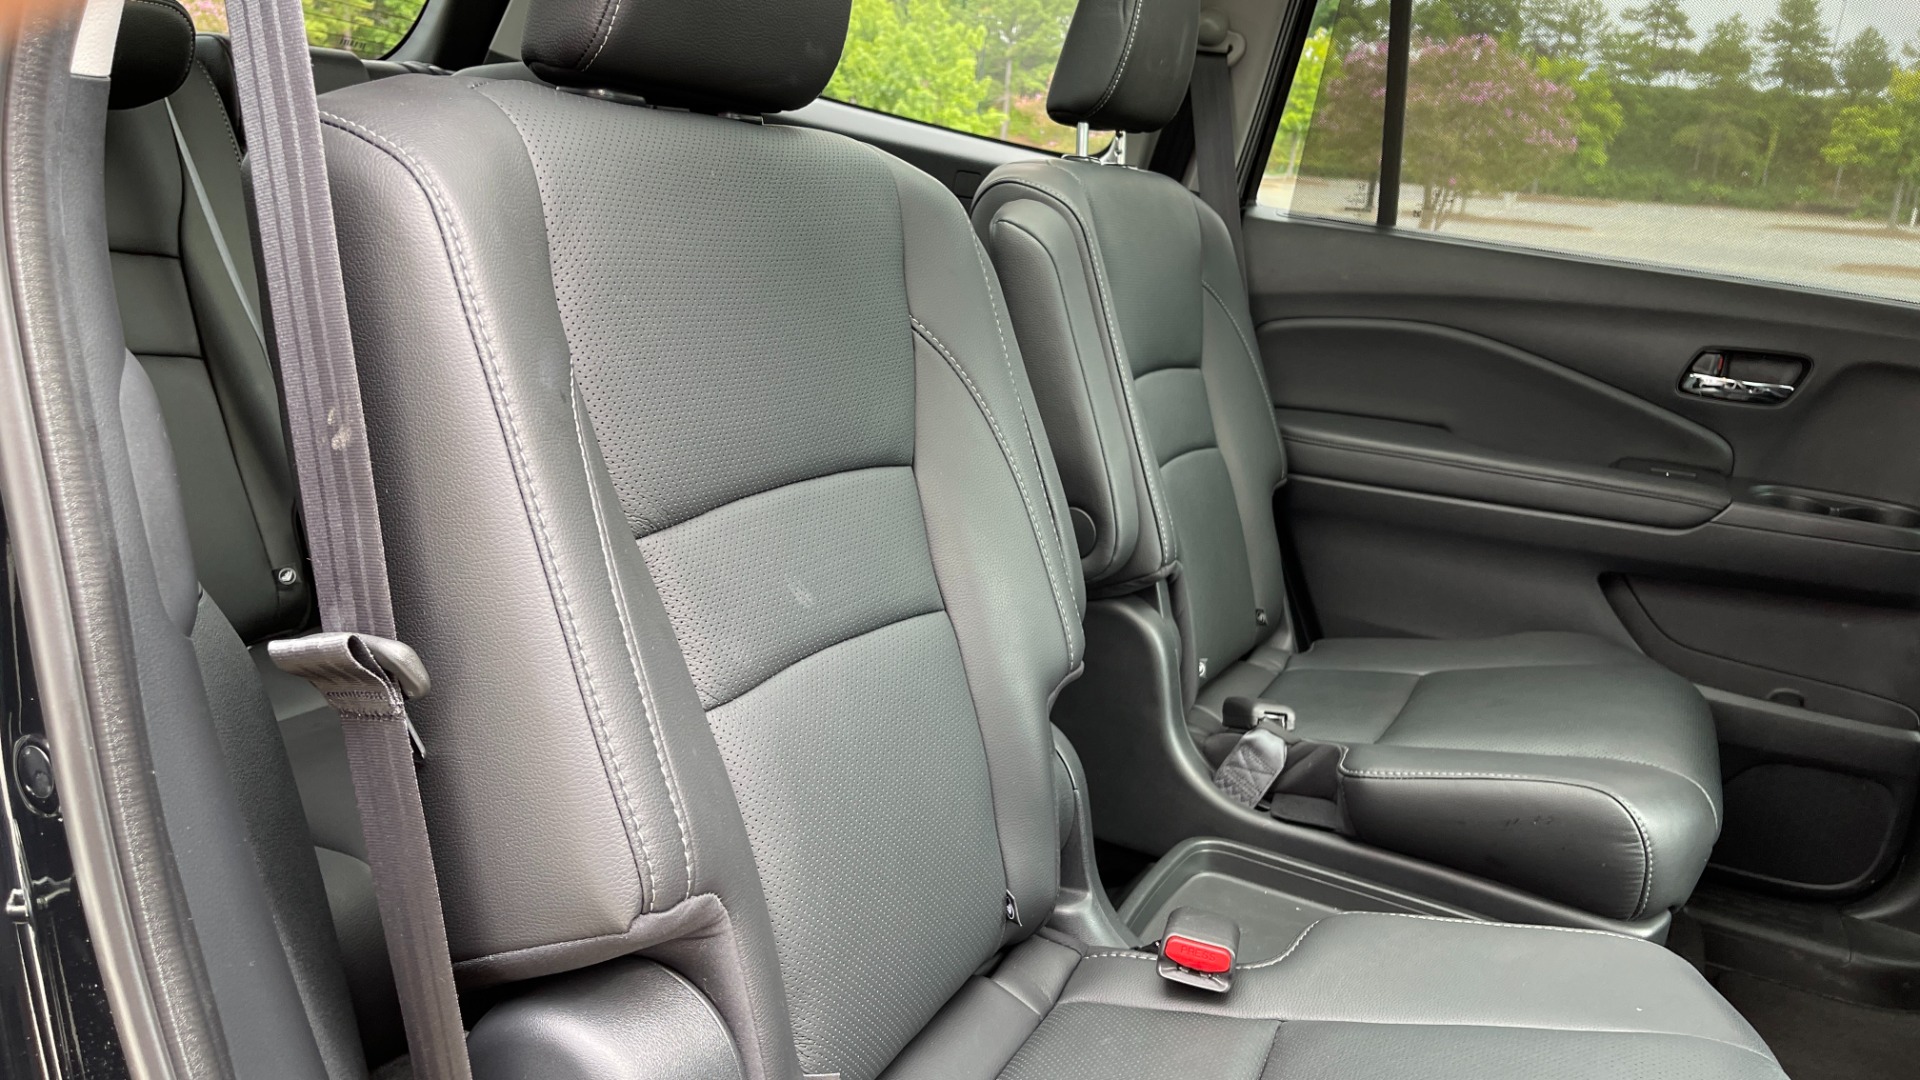 Used 2021 Honda Pilot ELITE / DVD SYSTEM / 3RD ROW / CAPTAINS CHAIRS / LEATHER for sale $42,995 at Formula Imports in Charlotte NC 28227 16